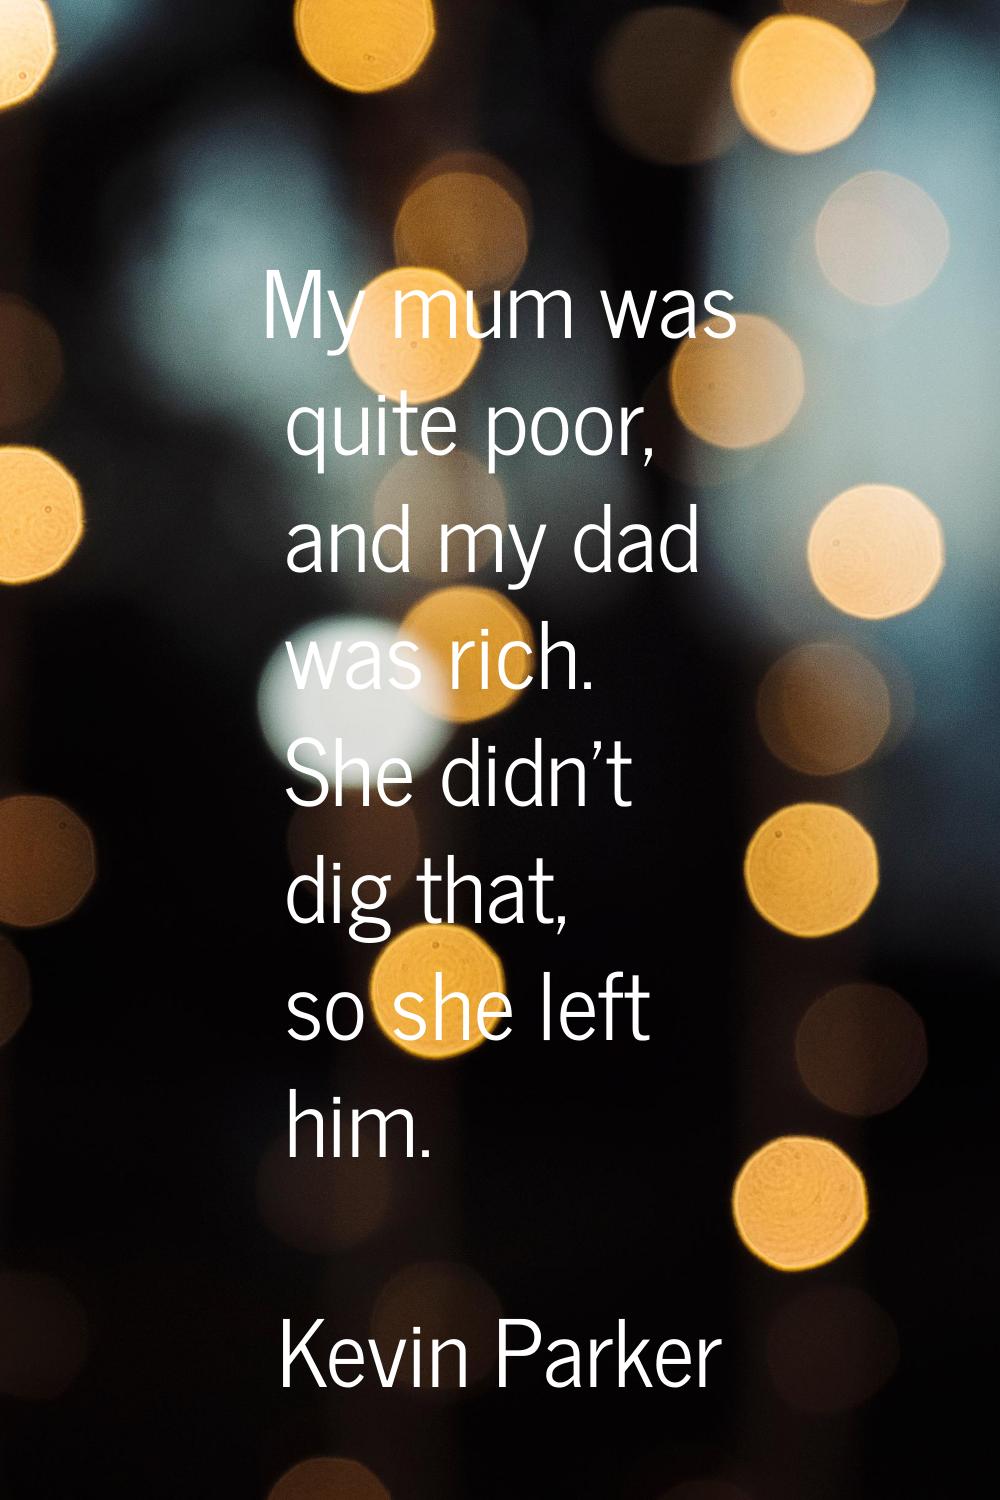 My mum was quite poor, and my dad was rich. She didn't dig that, so she left him.